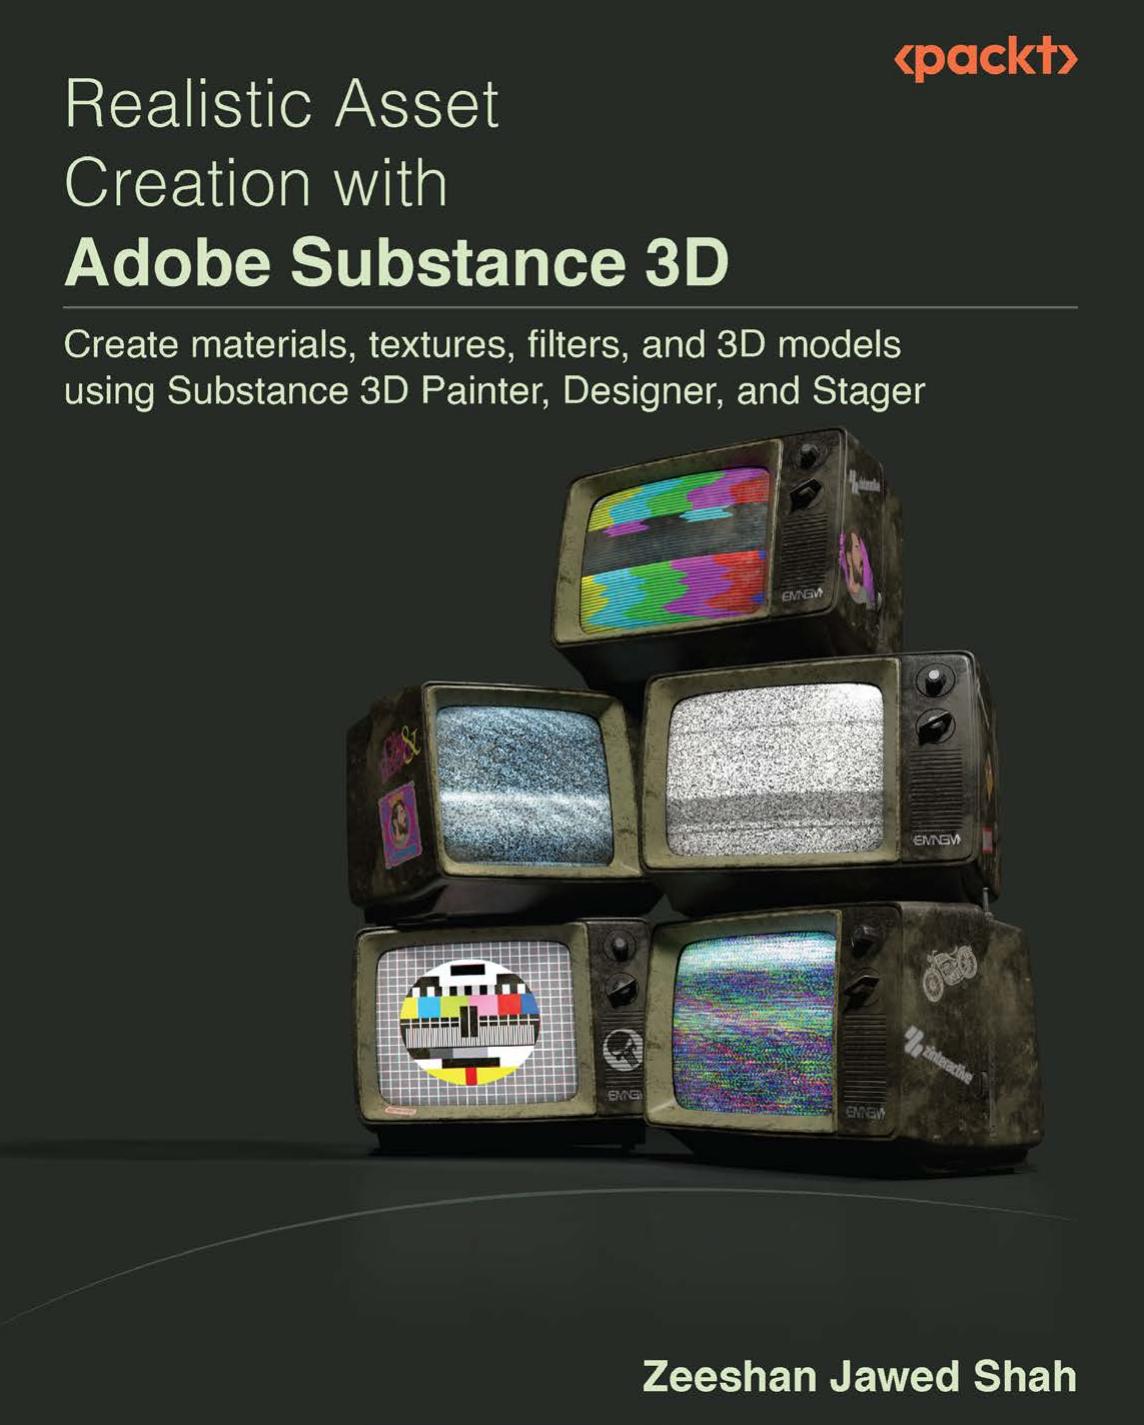 Realistic Asset Creation with Adobe Substance 3D by Zeeshan Jawed Shah